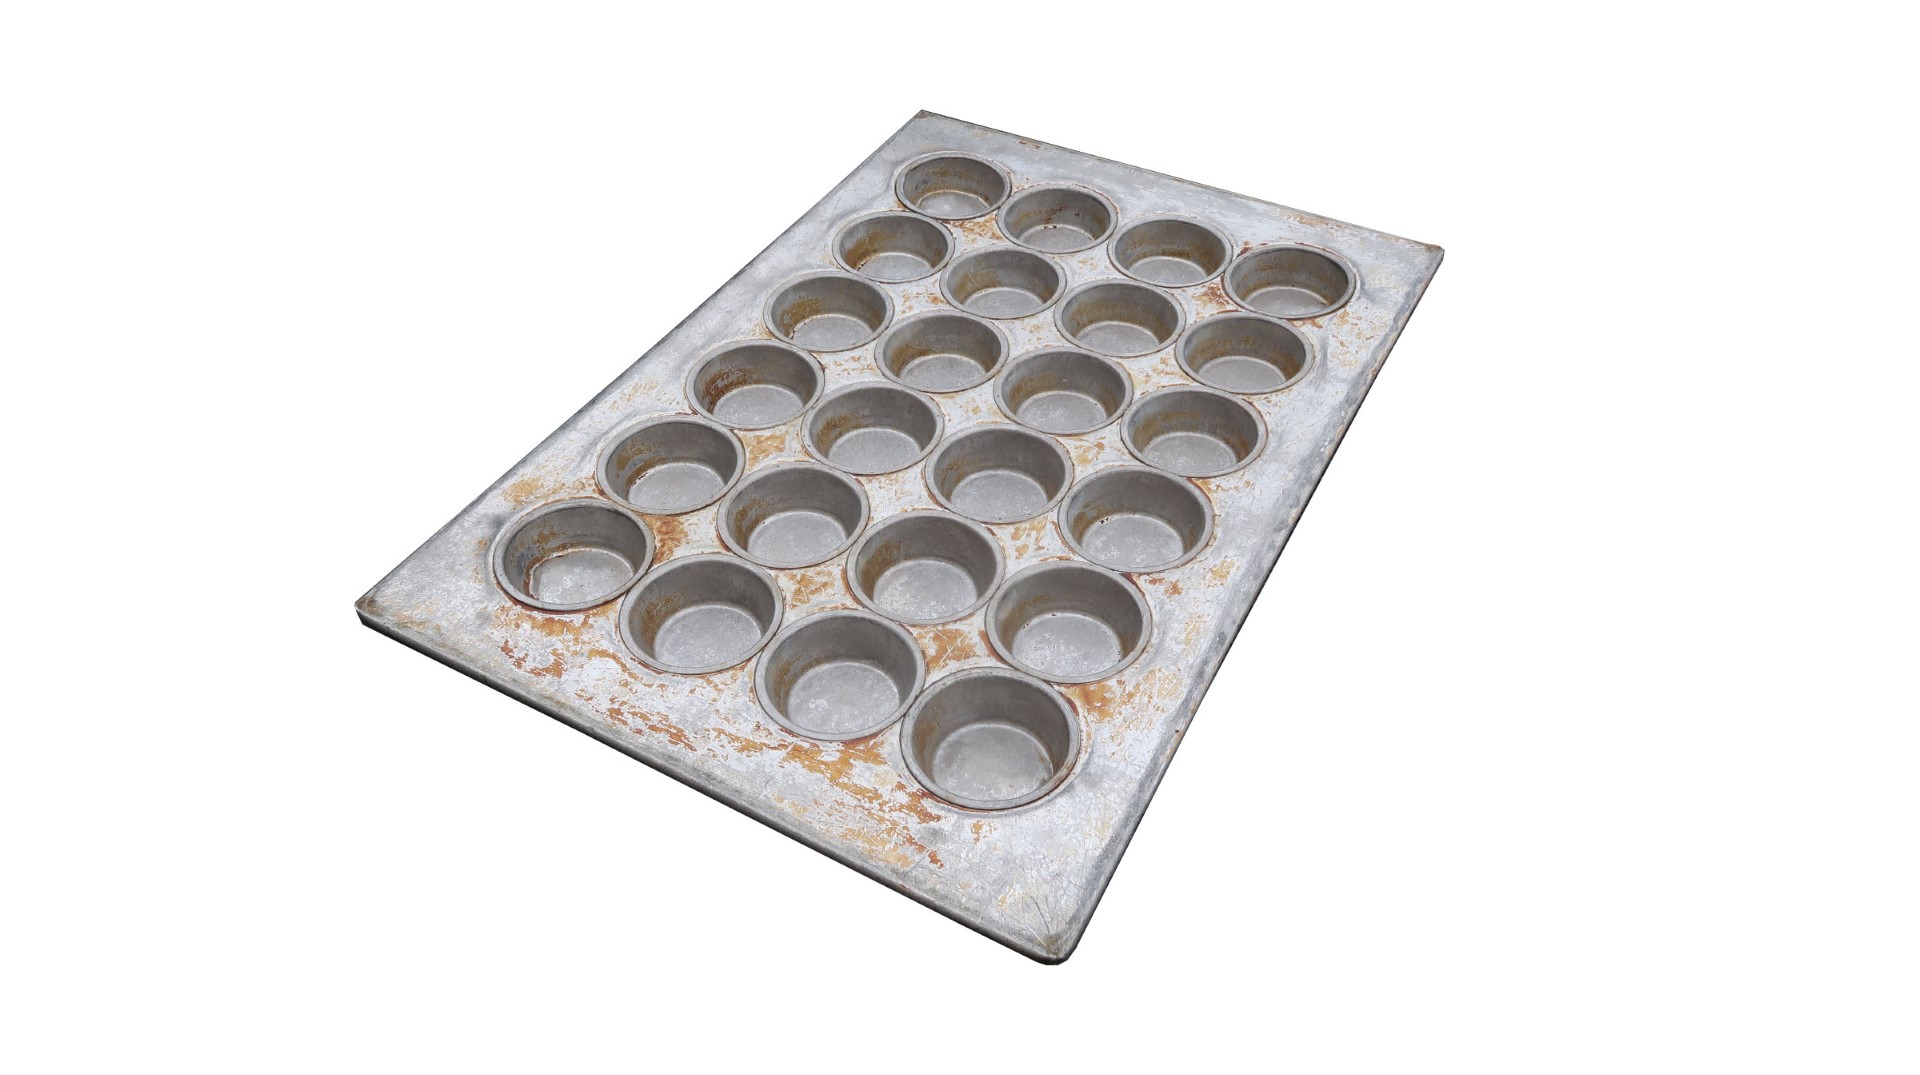 Round Mold Baking Pans, with 6 x 4 approximately 3-1/4 inch Dia. Round Molds